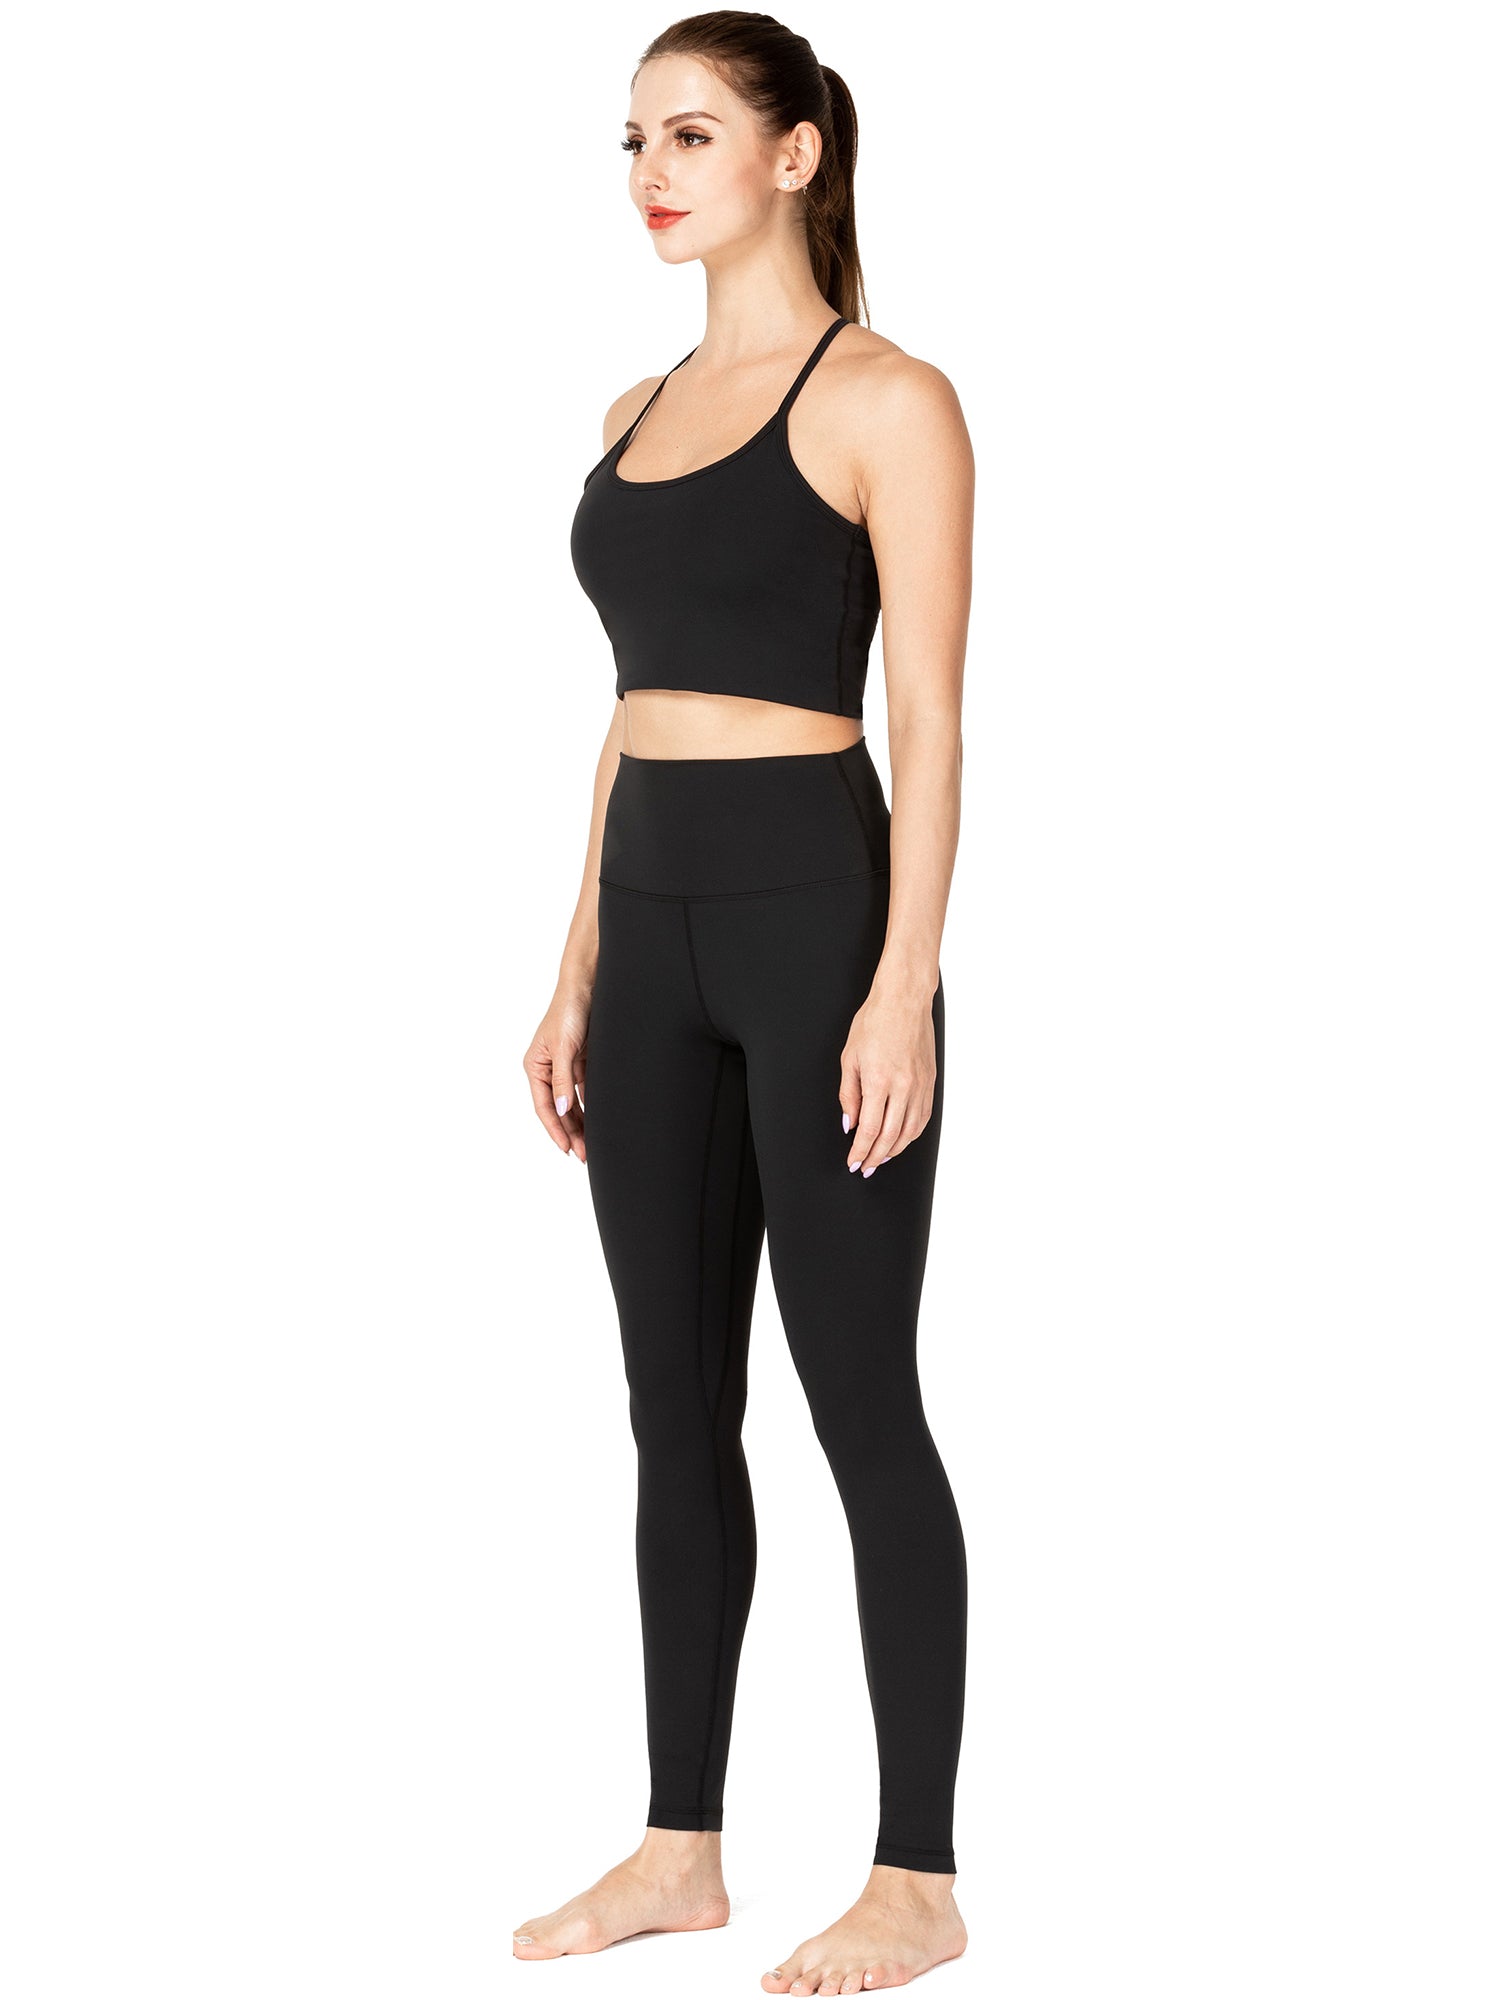 SUNZEL - Fitted Leggings – Beyond Marketplace